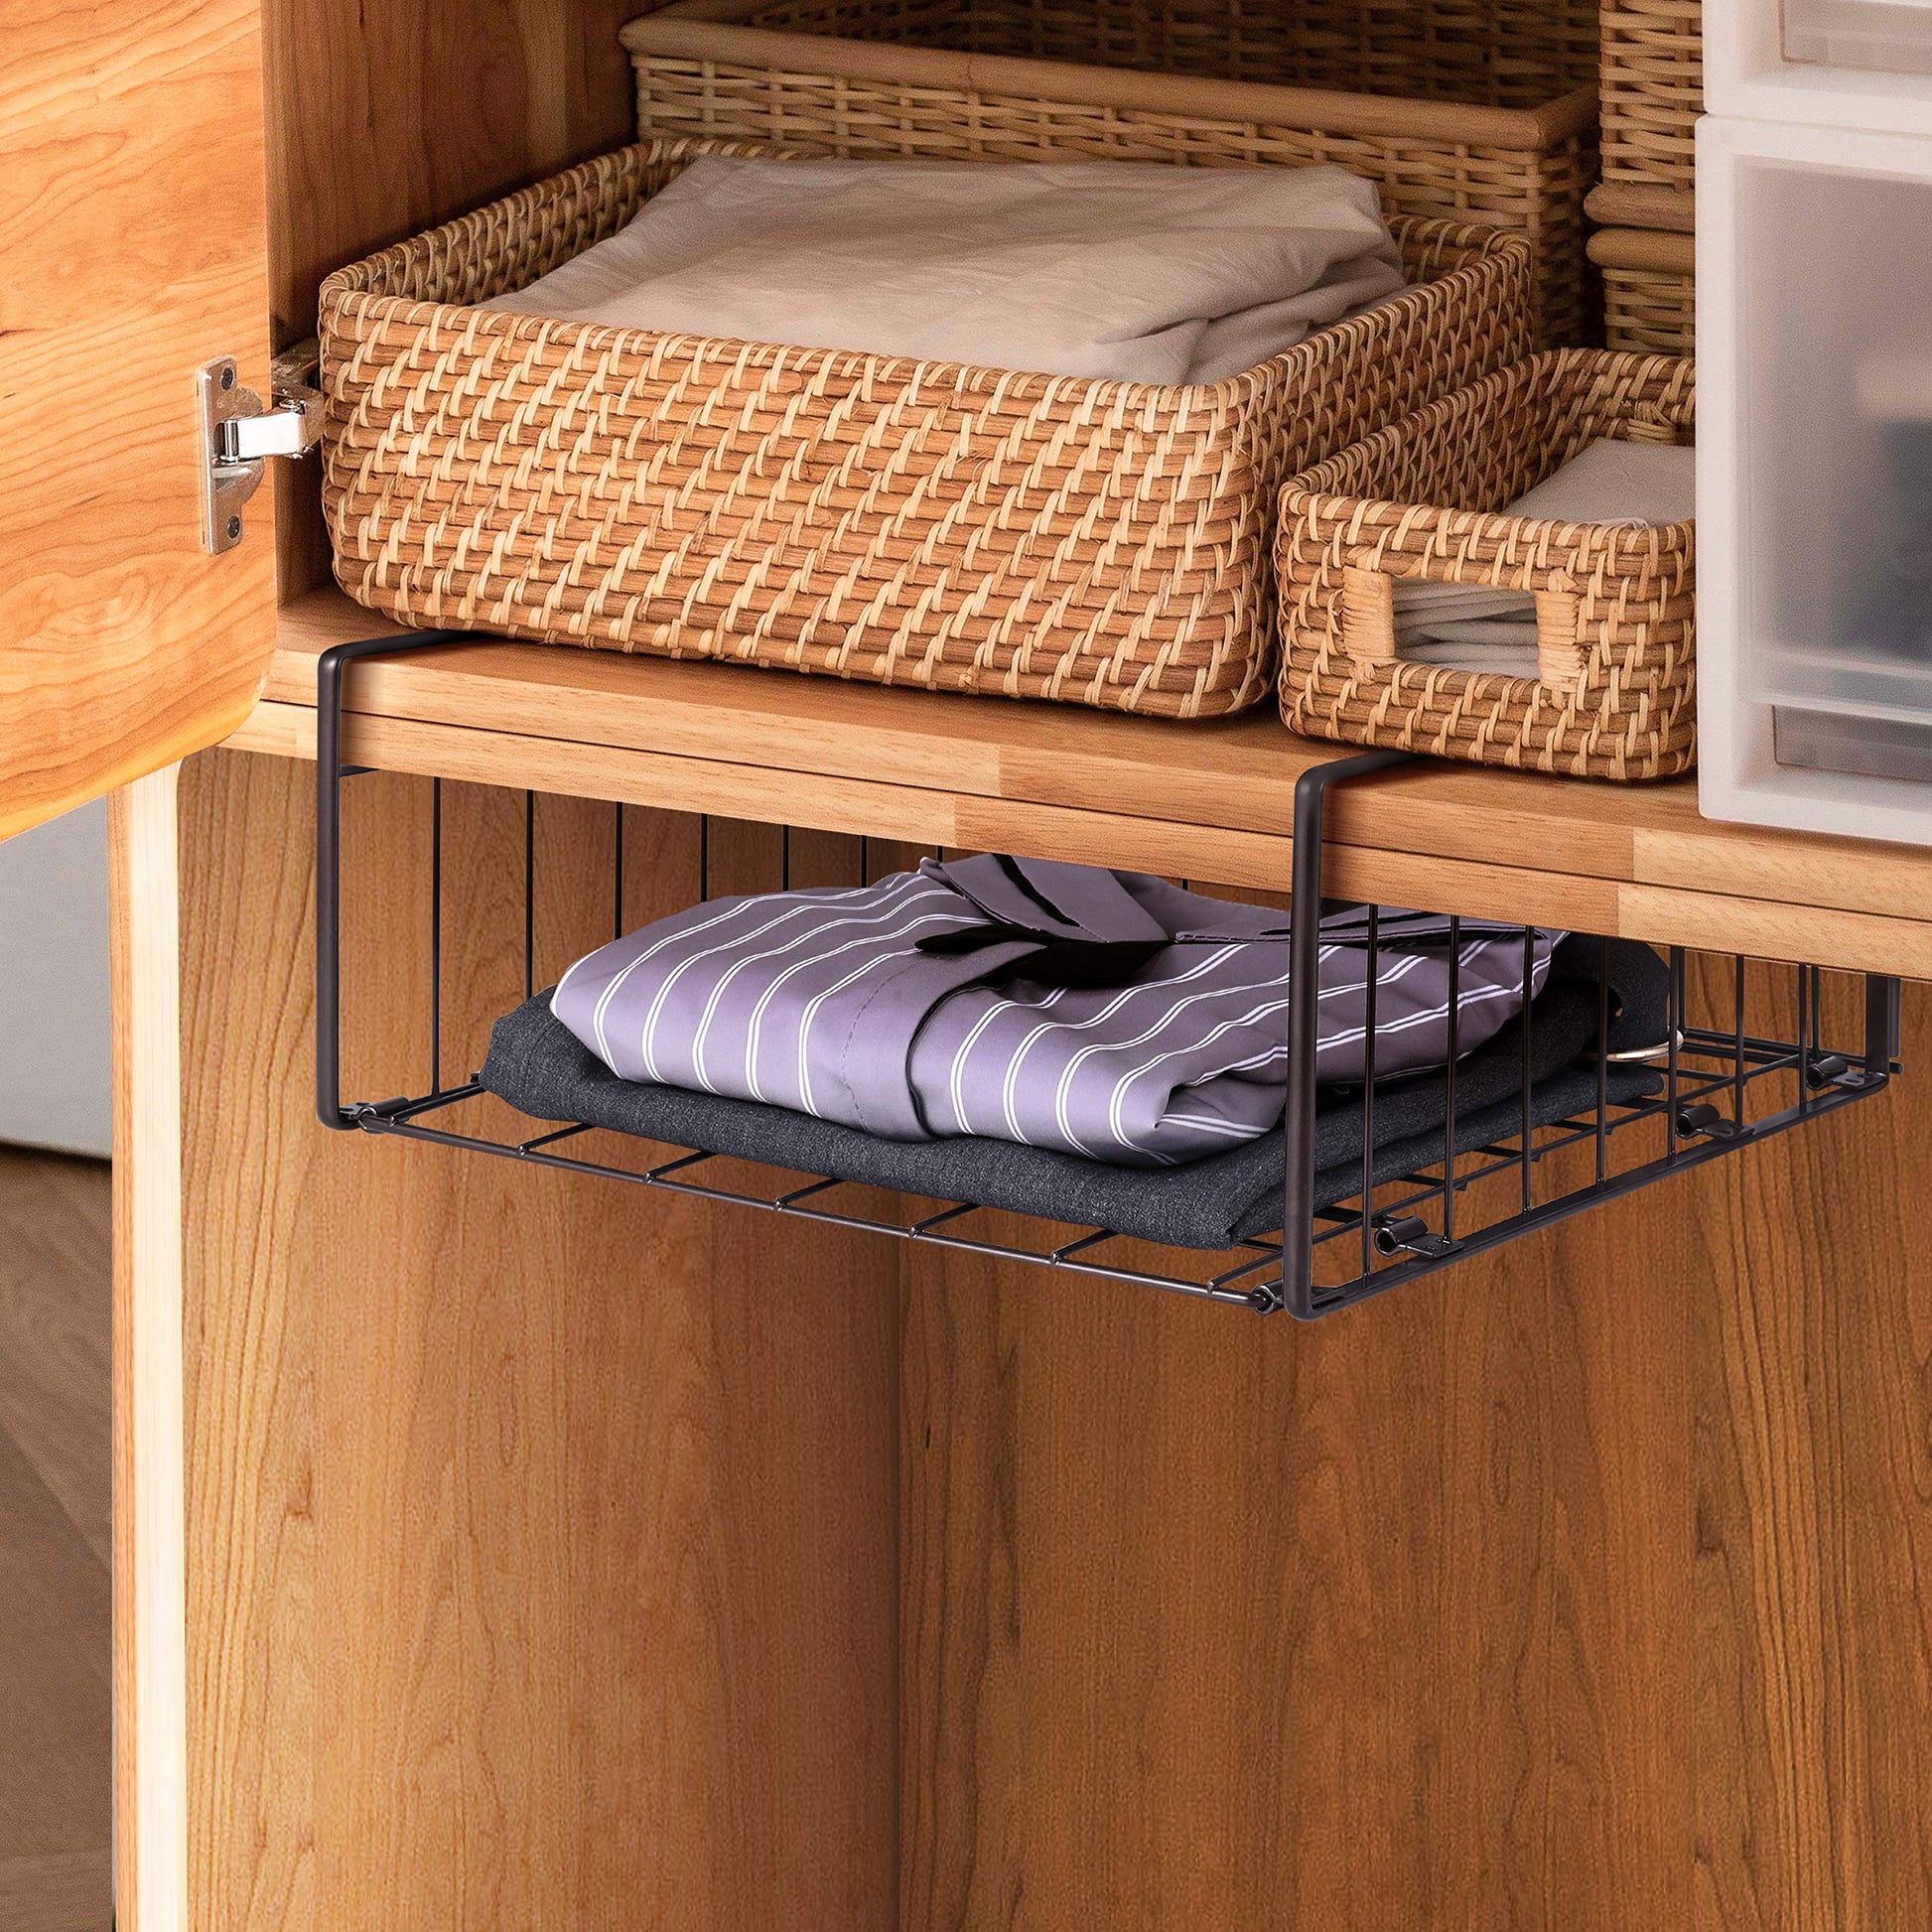 Masirs Kitchen Cabinet Organizer Set - Three Shelves, Two Under Shelf Baskets Will Instantly Create Additional Cabinet or Counter Storage Space to Organize